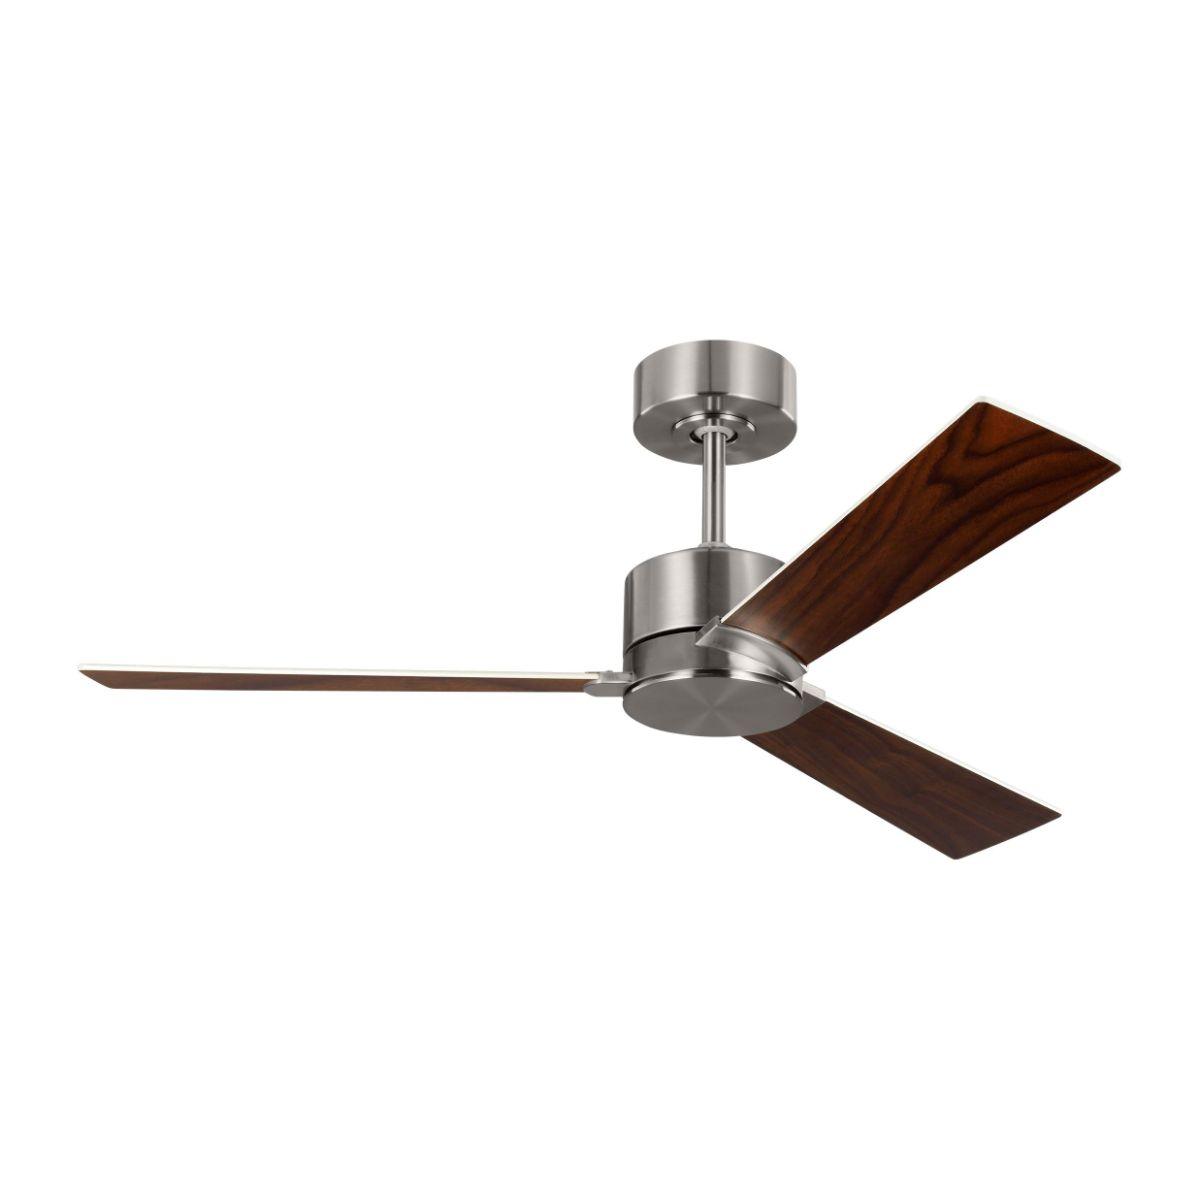 Rozzen 44 Inch DC Motor Ceiling Fan With Remote, Brushed Steel Housing With Silver/American Walnut Reversible Blades - Bees Lighting